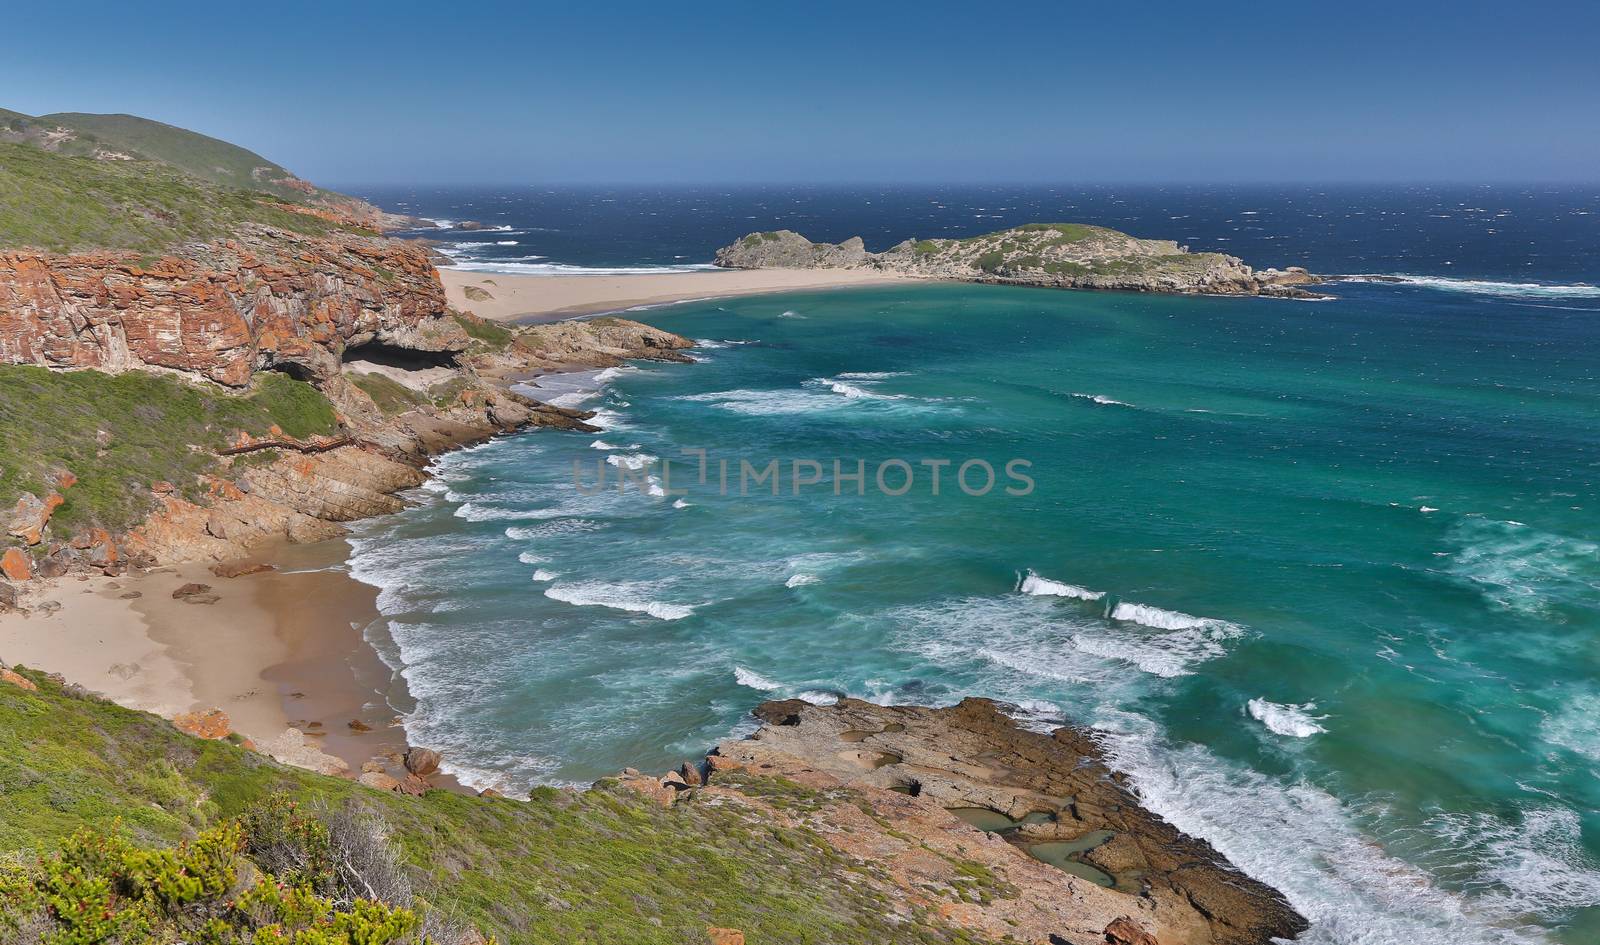 Magnificent coastline at the Robberg near Pletternberg Bay  in South Africa